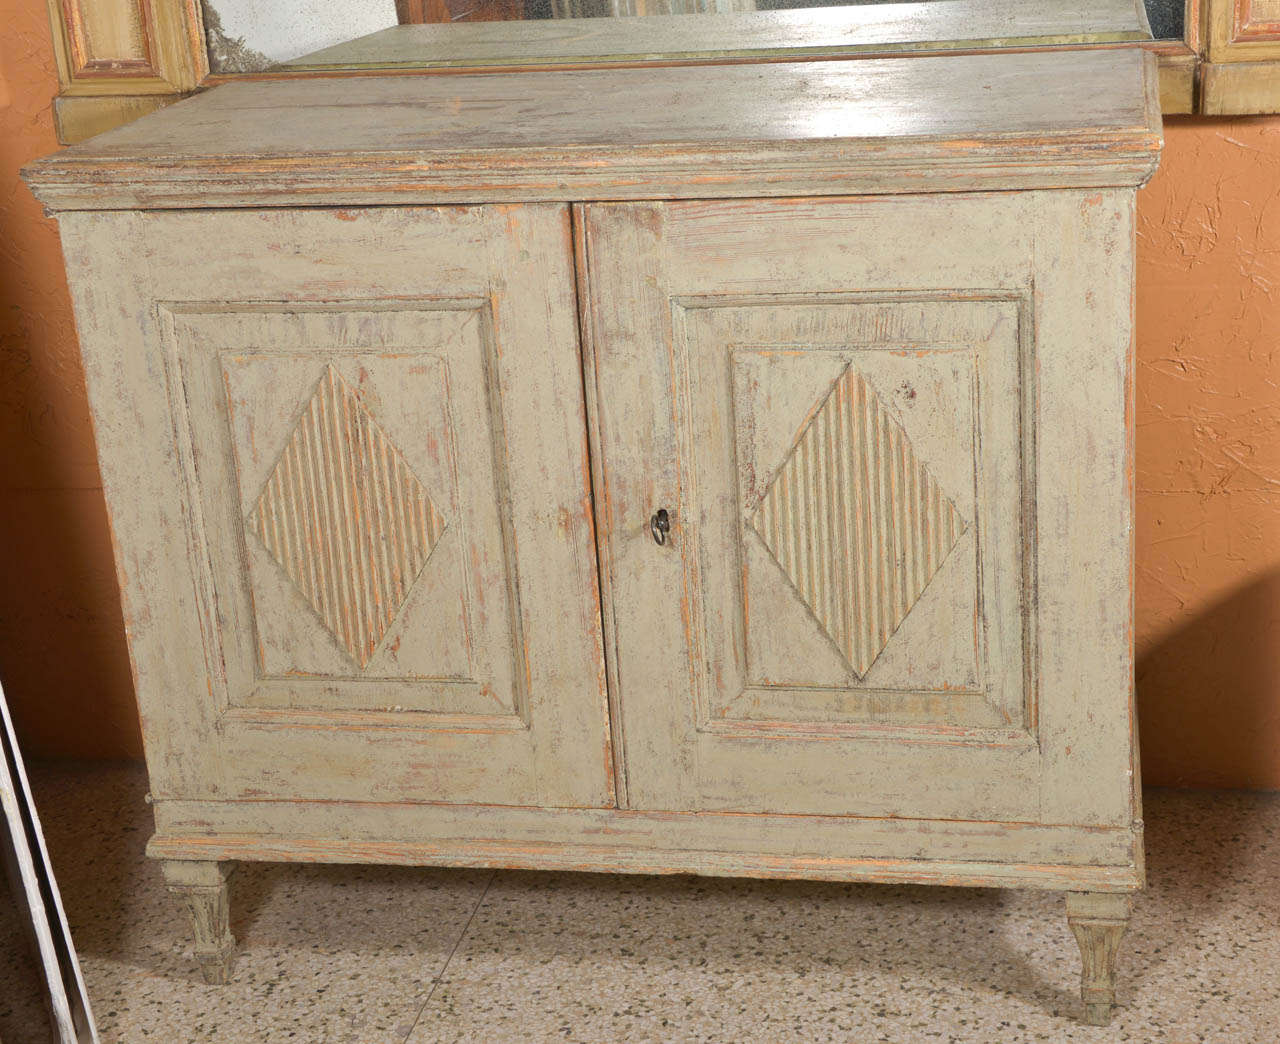 Small two door Gustavian cabinet in scaped painted finish.